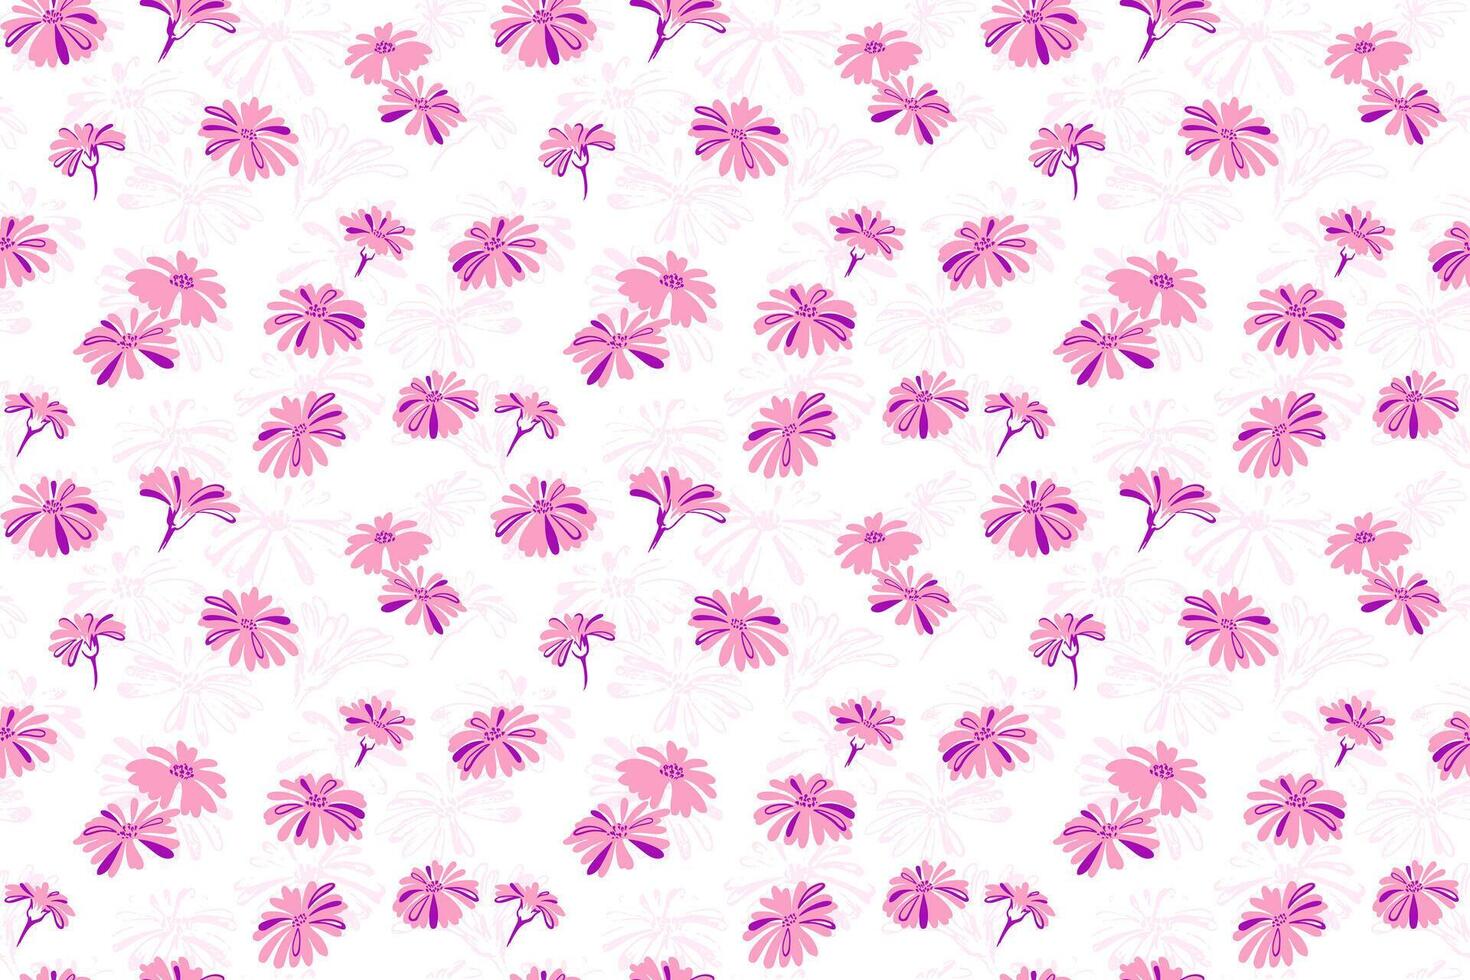 Seamless simple creative pink flowers pattern on a white background. Vector hand drawn doodle trendy abstract shape floral. Template for design, ornament, fabric, textile, fashion